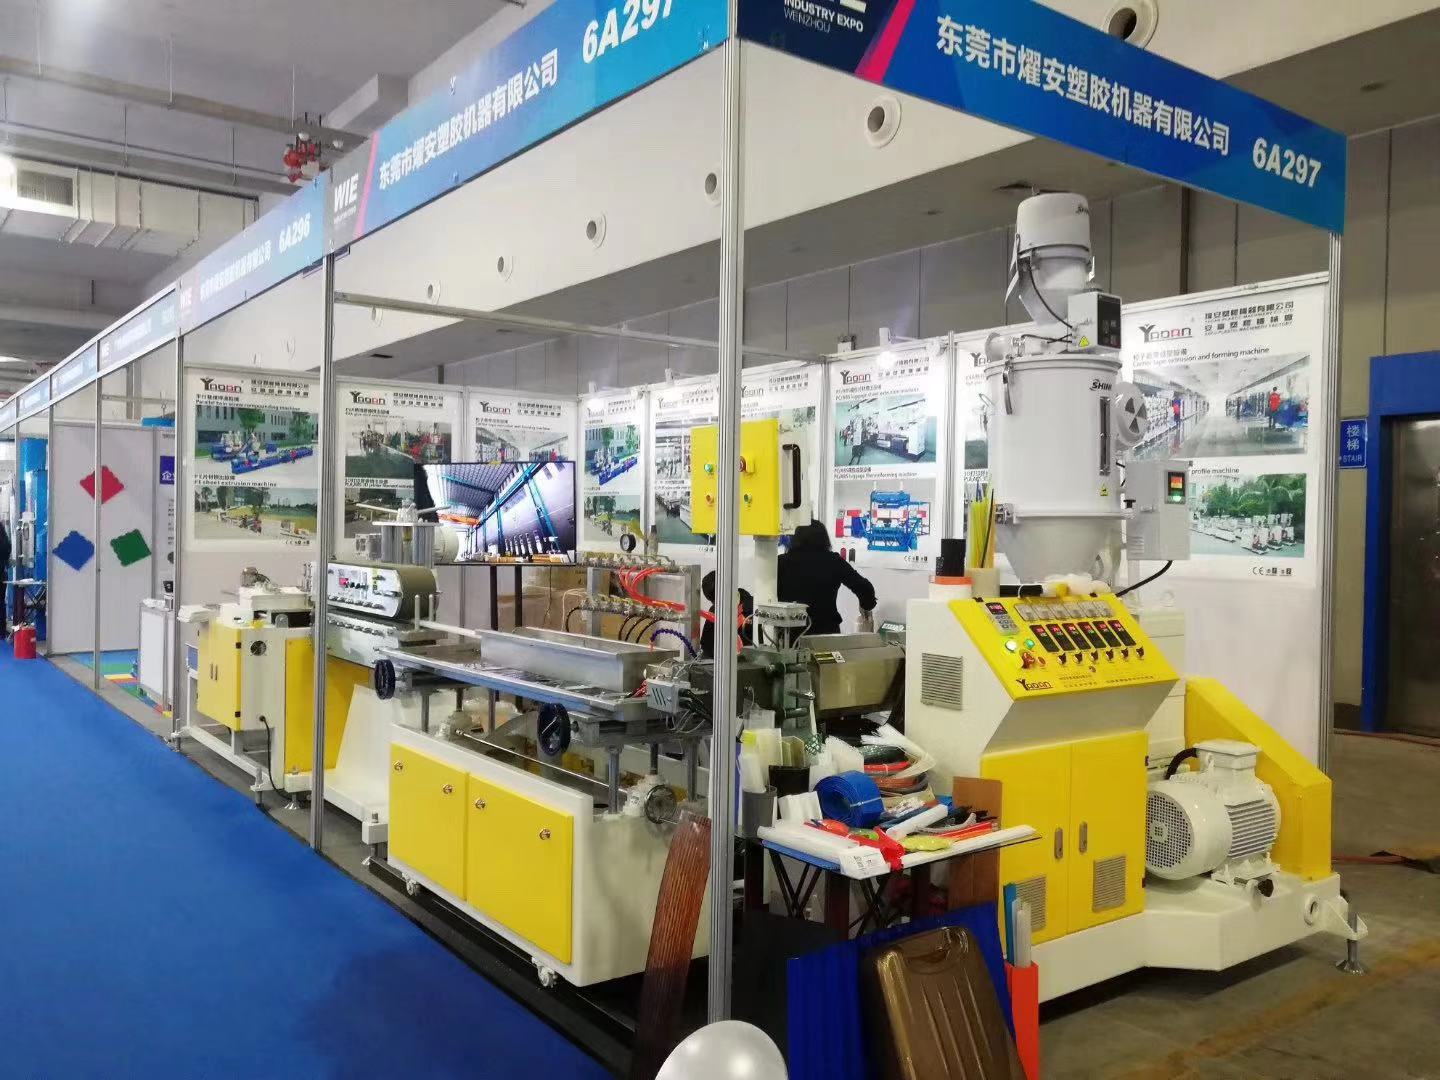 PC led tube light extrusion machine running in 2019 WENZHOU international industry fair